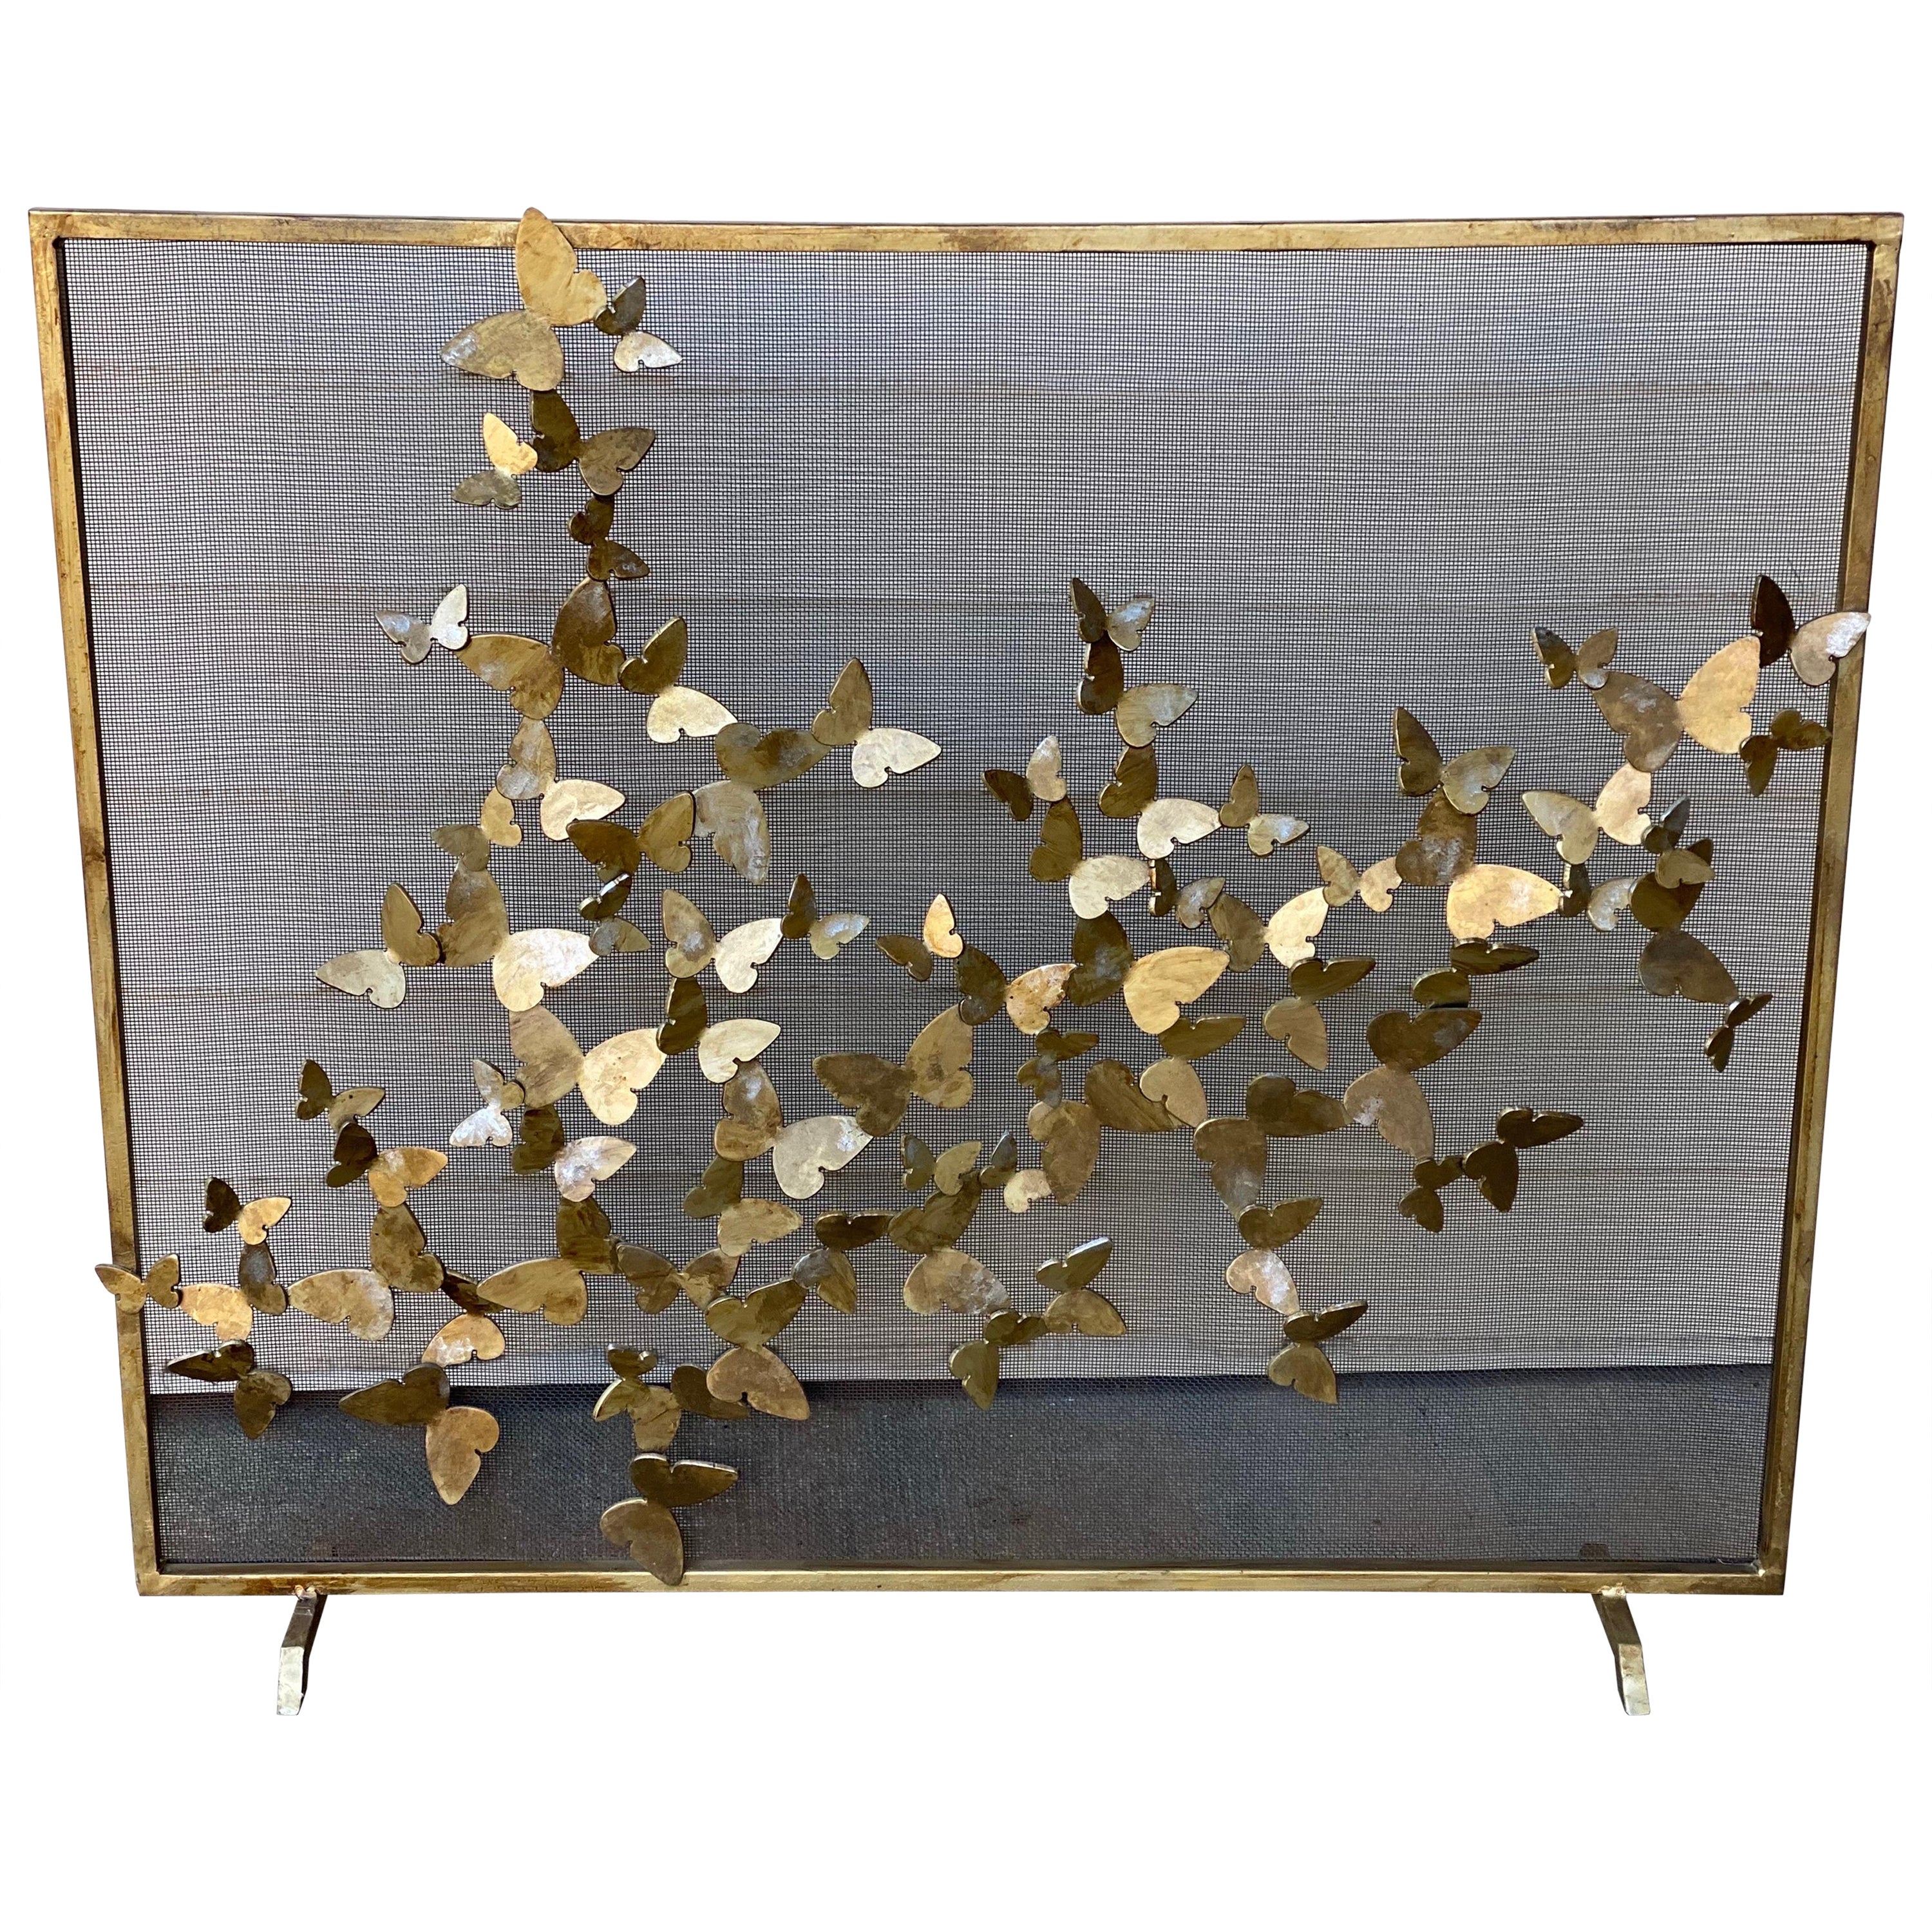 Custom Made Iron Fire-screen with Butterflies in Bronze Finish, 21st Century